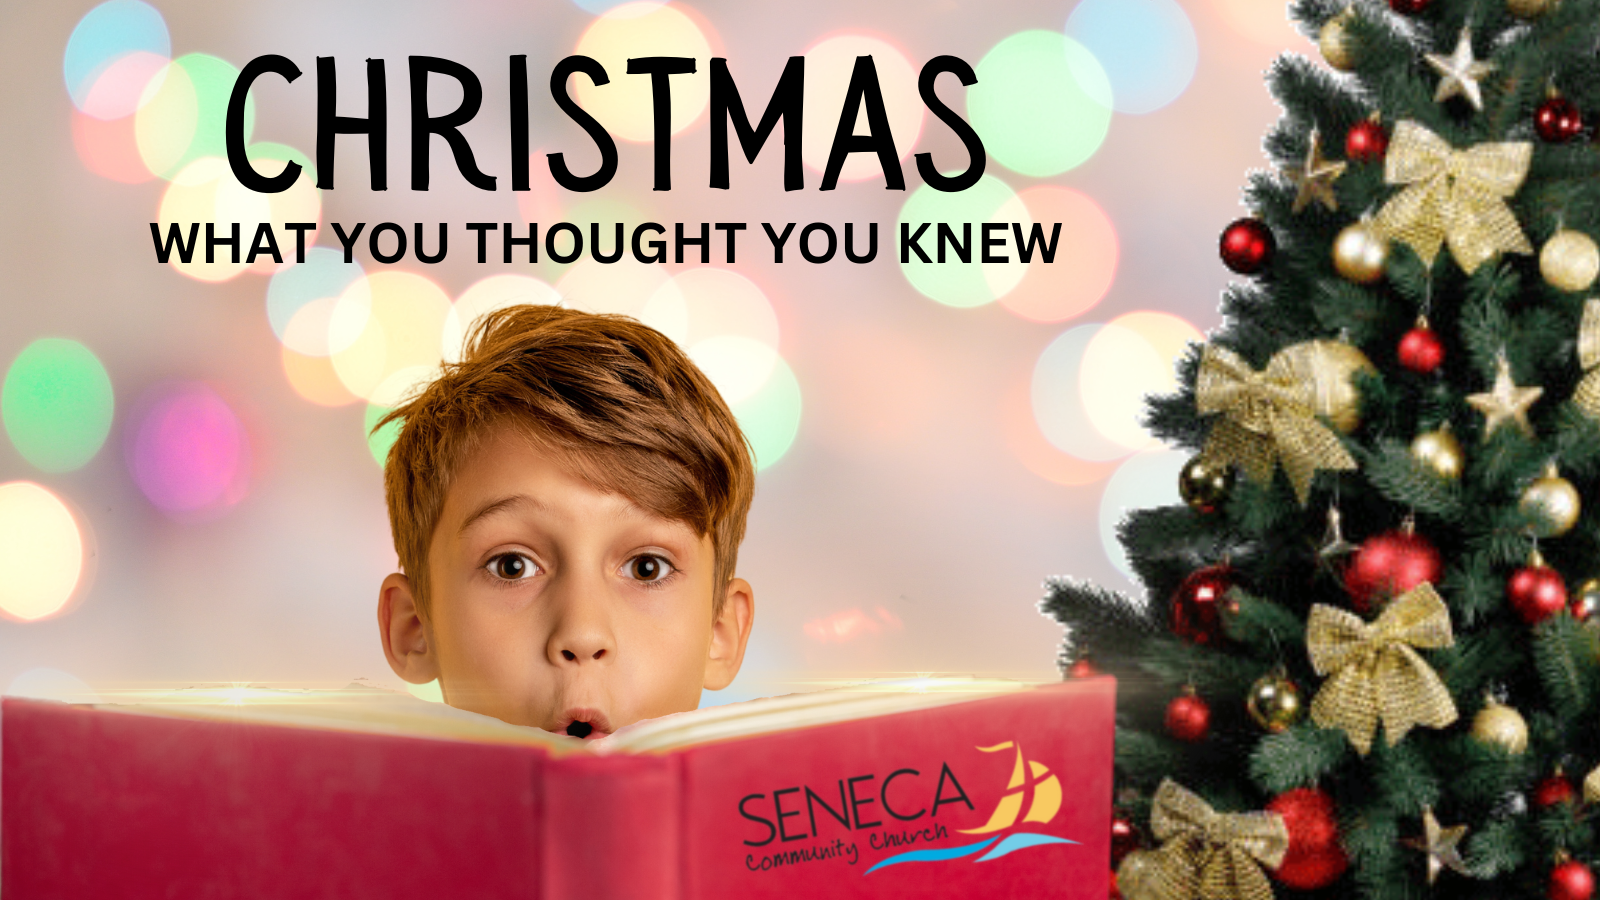 Christmas: What You Thought You Knew